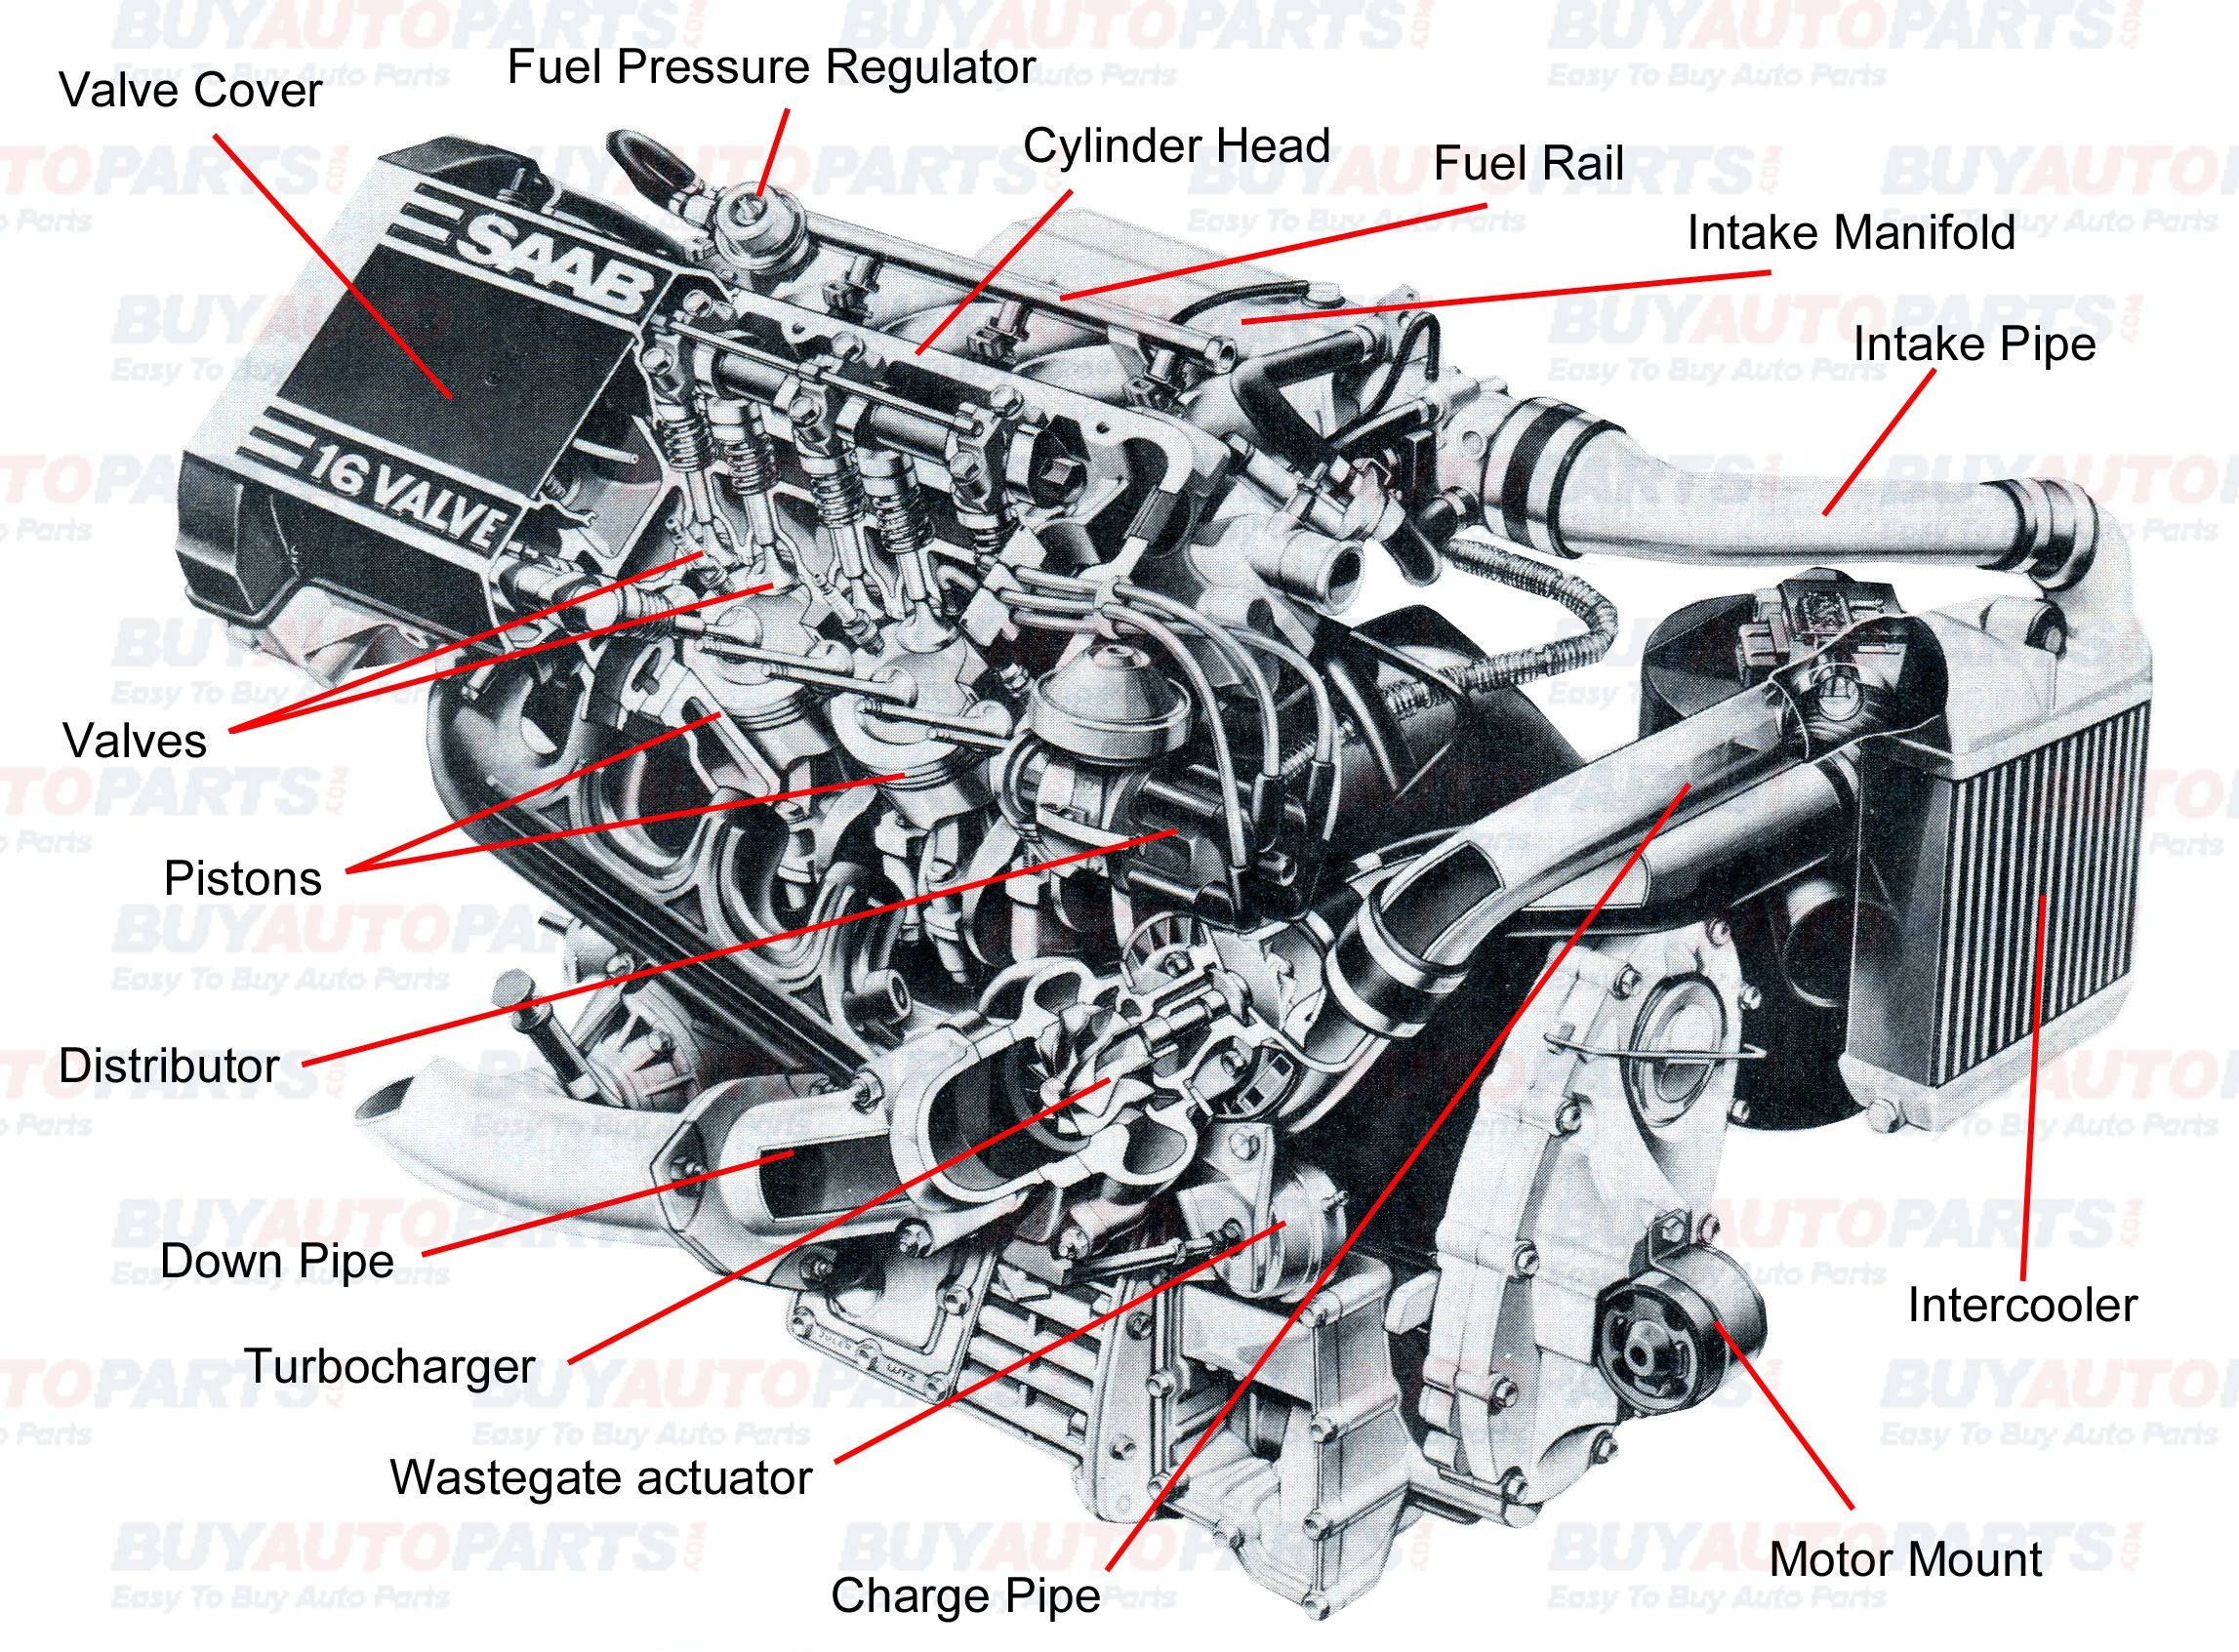 Ic Engine Diagram Pin by Jimmiejanet Testellamwfz On What Does An Engine with Turbo Of Ic Engine Diagram